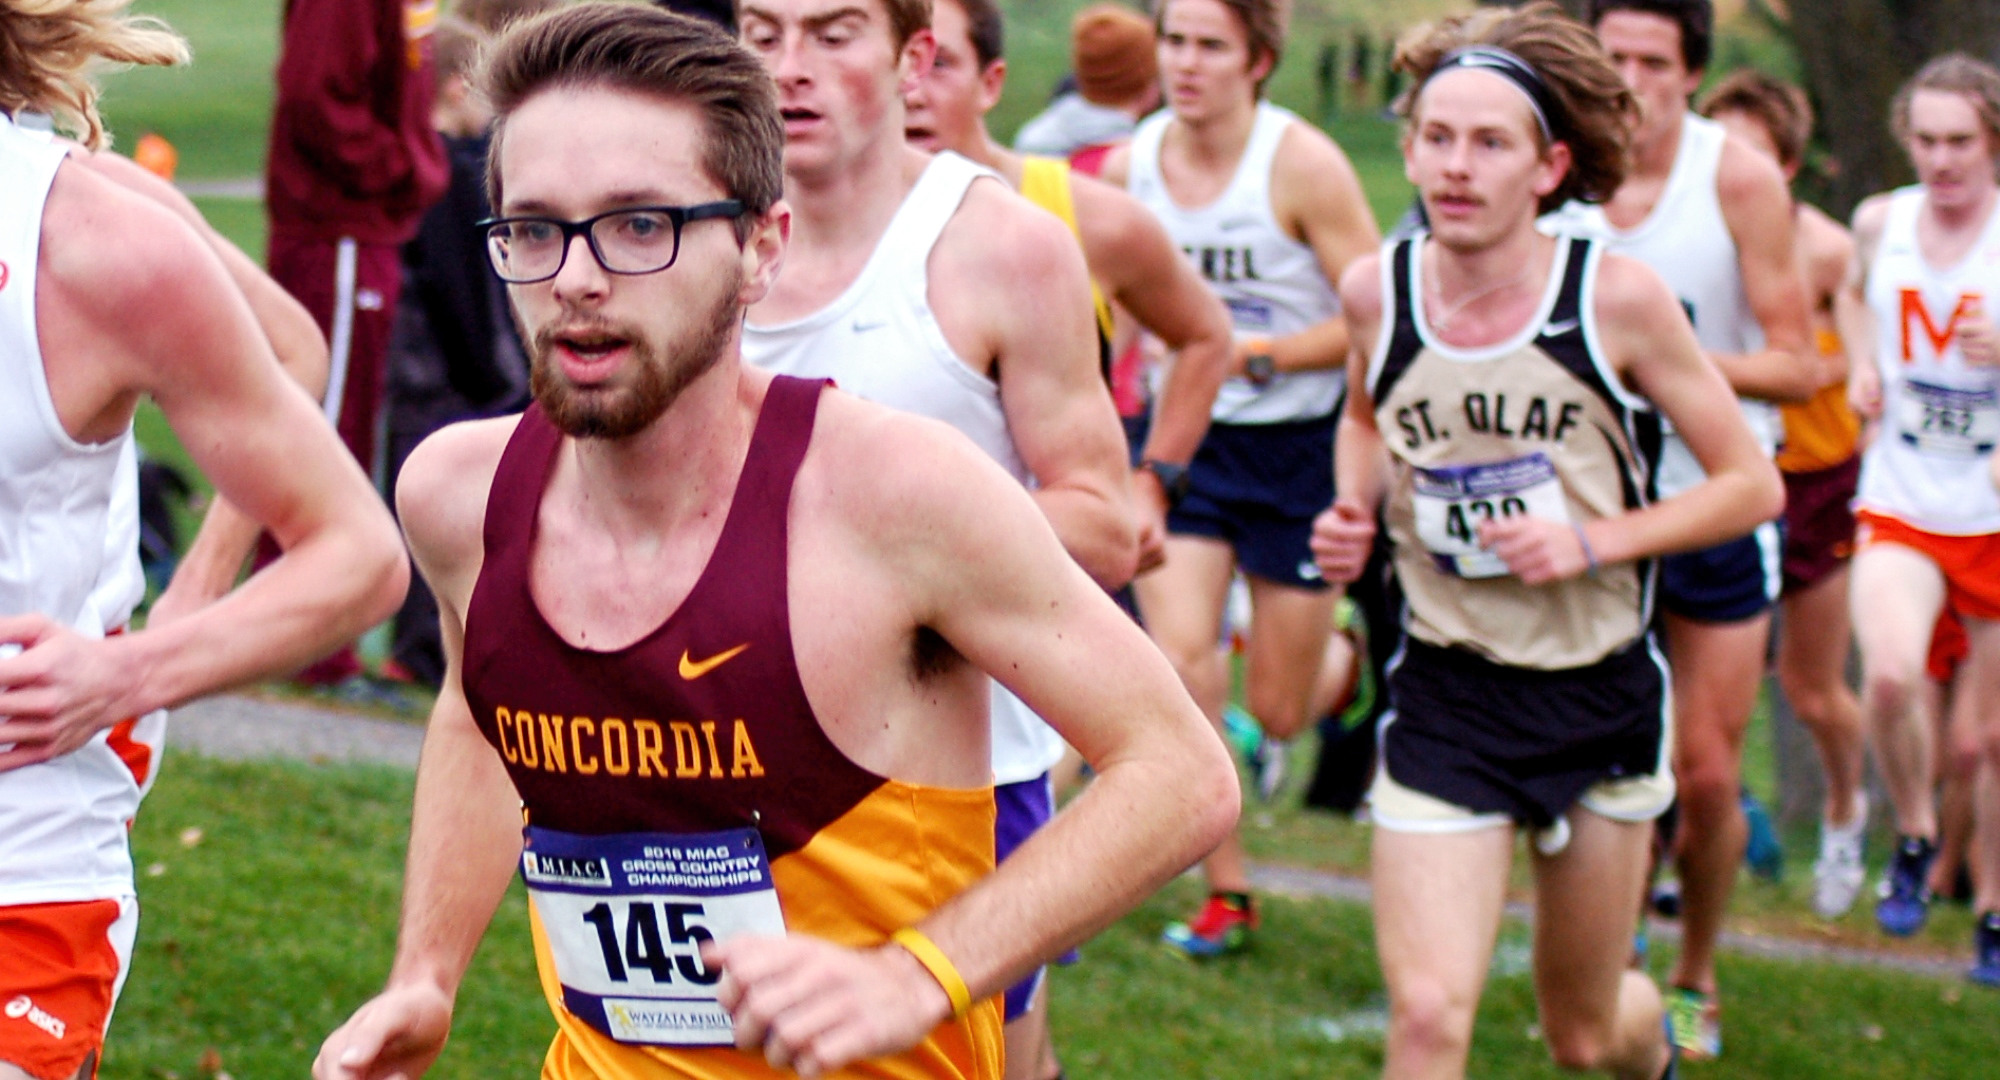 Freshman Eric Wicklund posted a Top 50 finish in his first conference meet and led the Cobbers at the MIAC Meet.